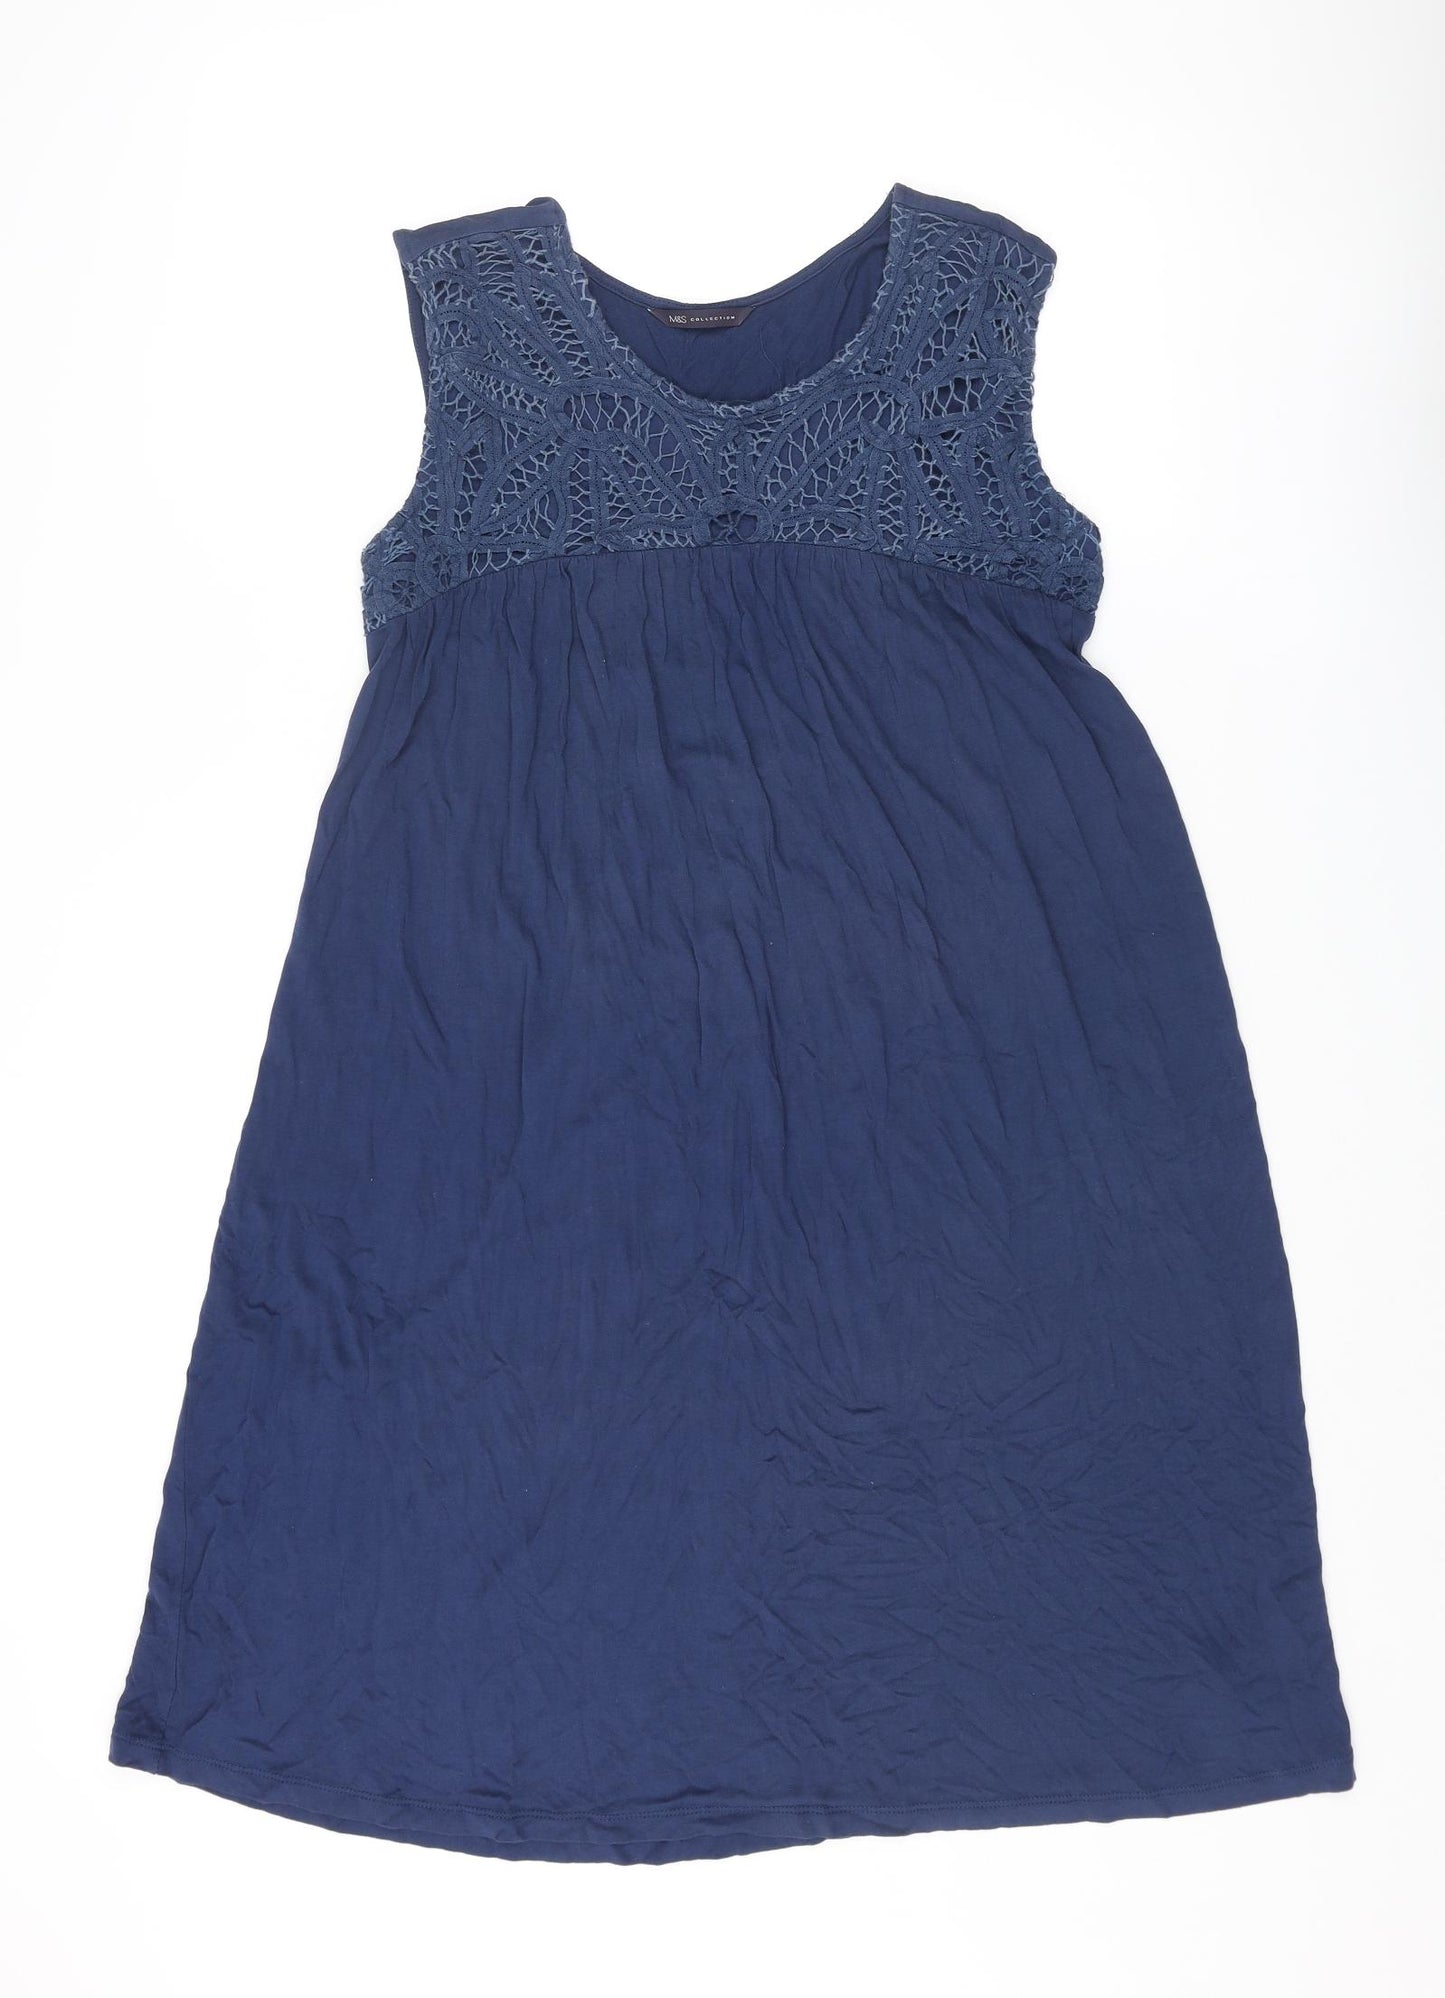 Marks and Spencer Womens Blue Viscose Tank Dress Size 10 Round Neck Pullover